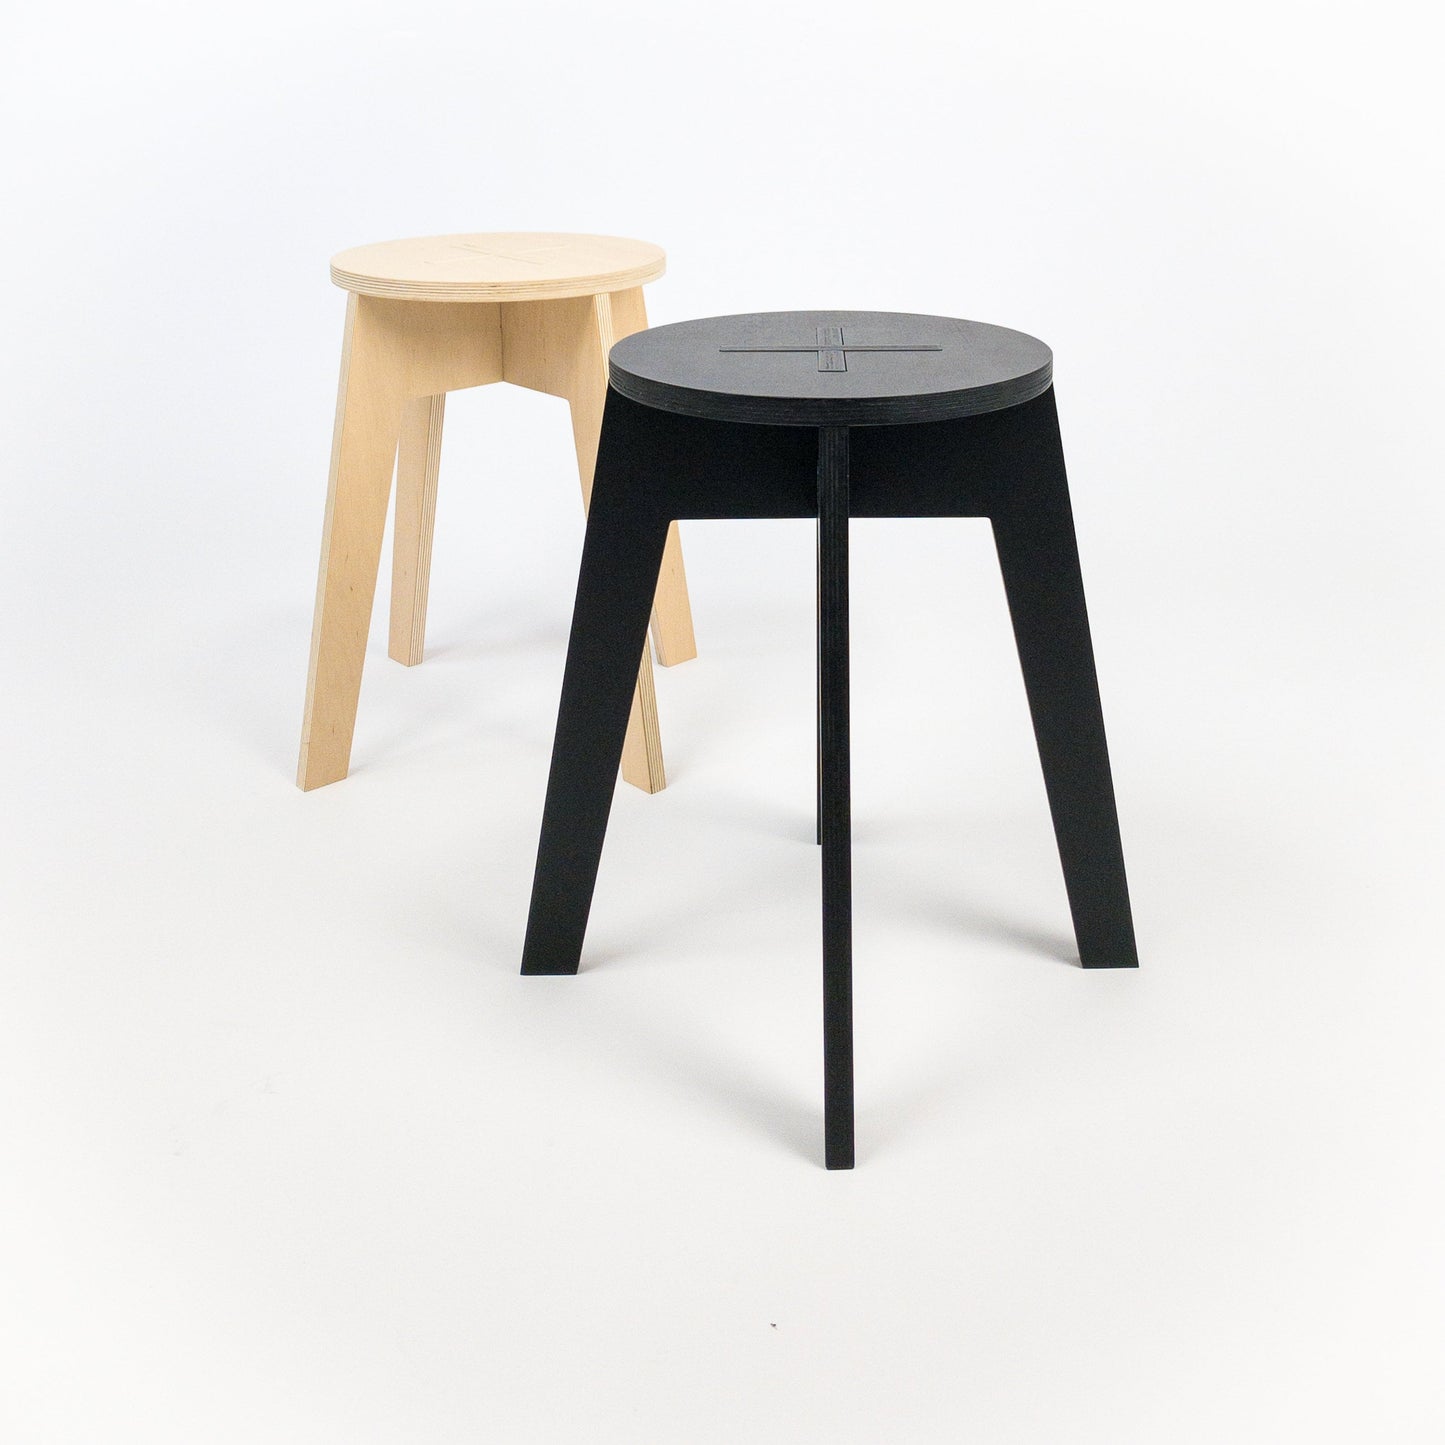 Modern plywood stool 45cm (17 3/4 ") high, great for craft fairs, studio, workshop, office